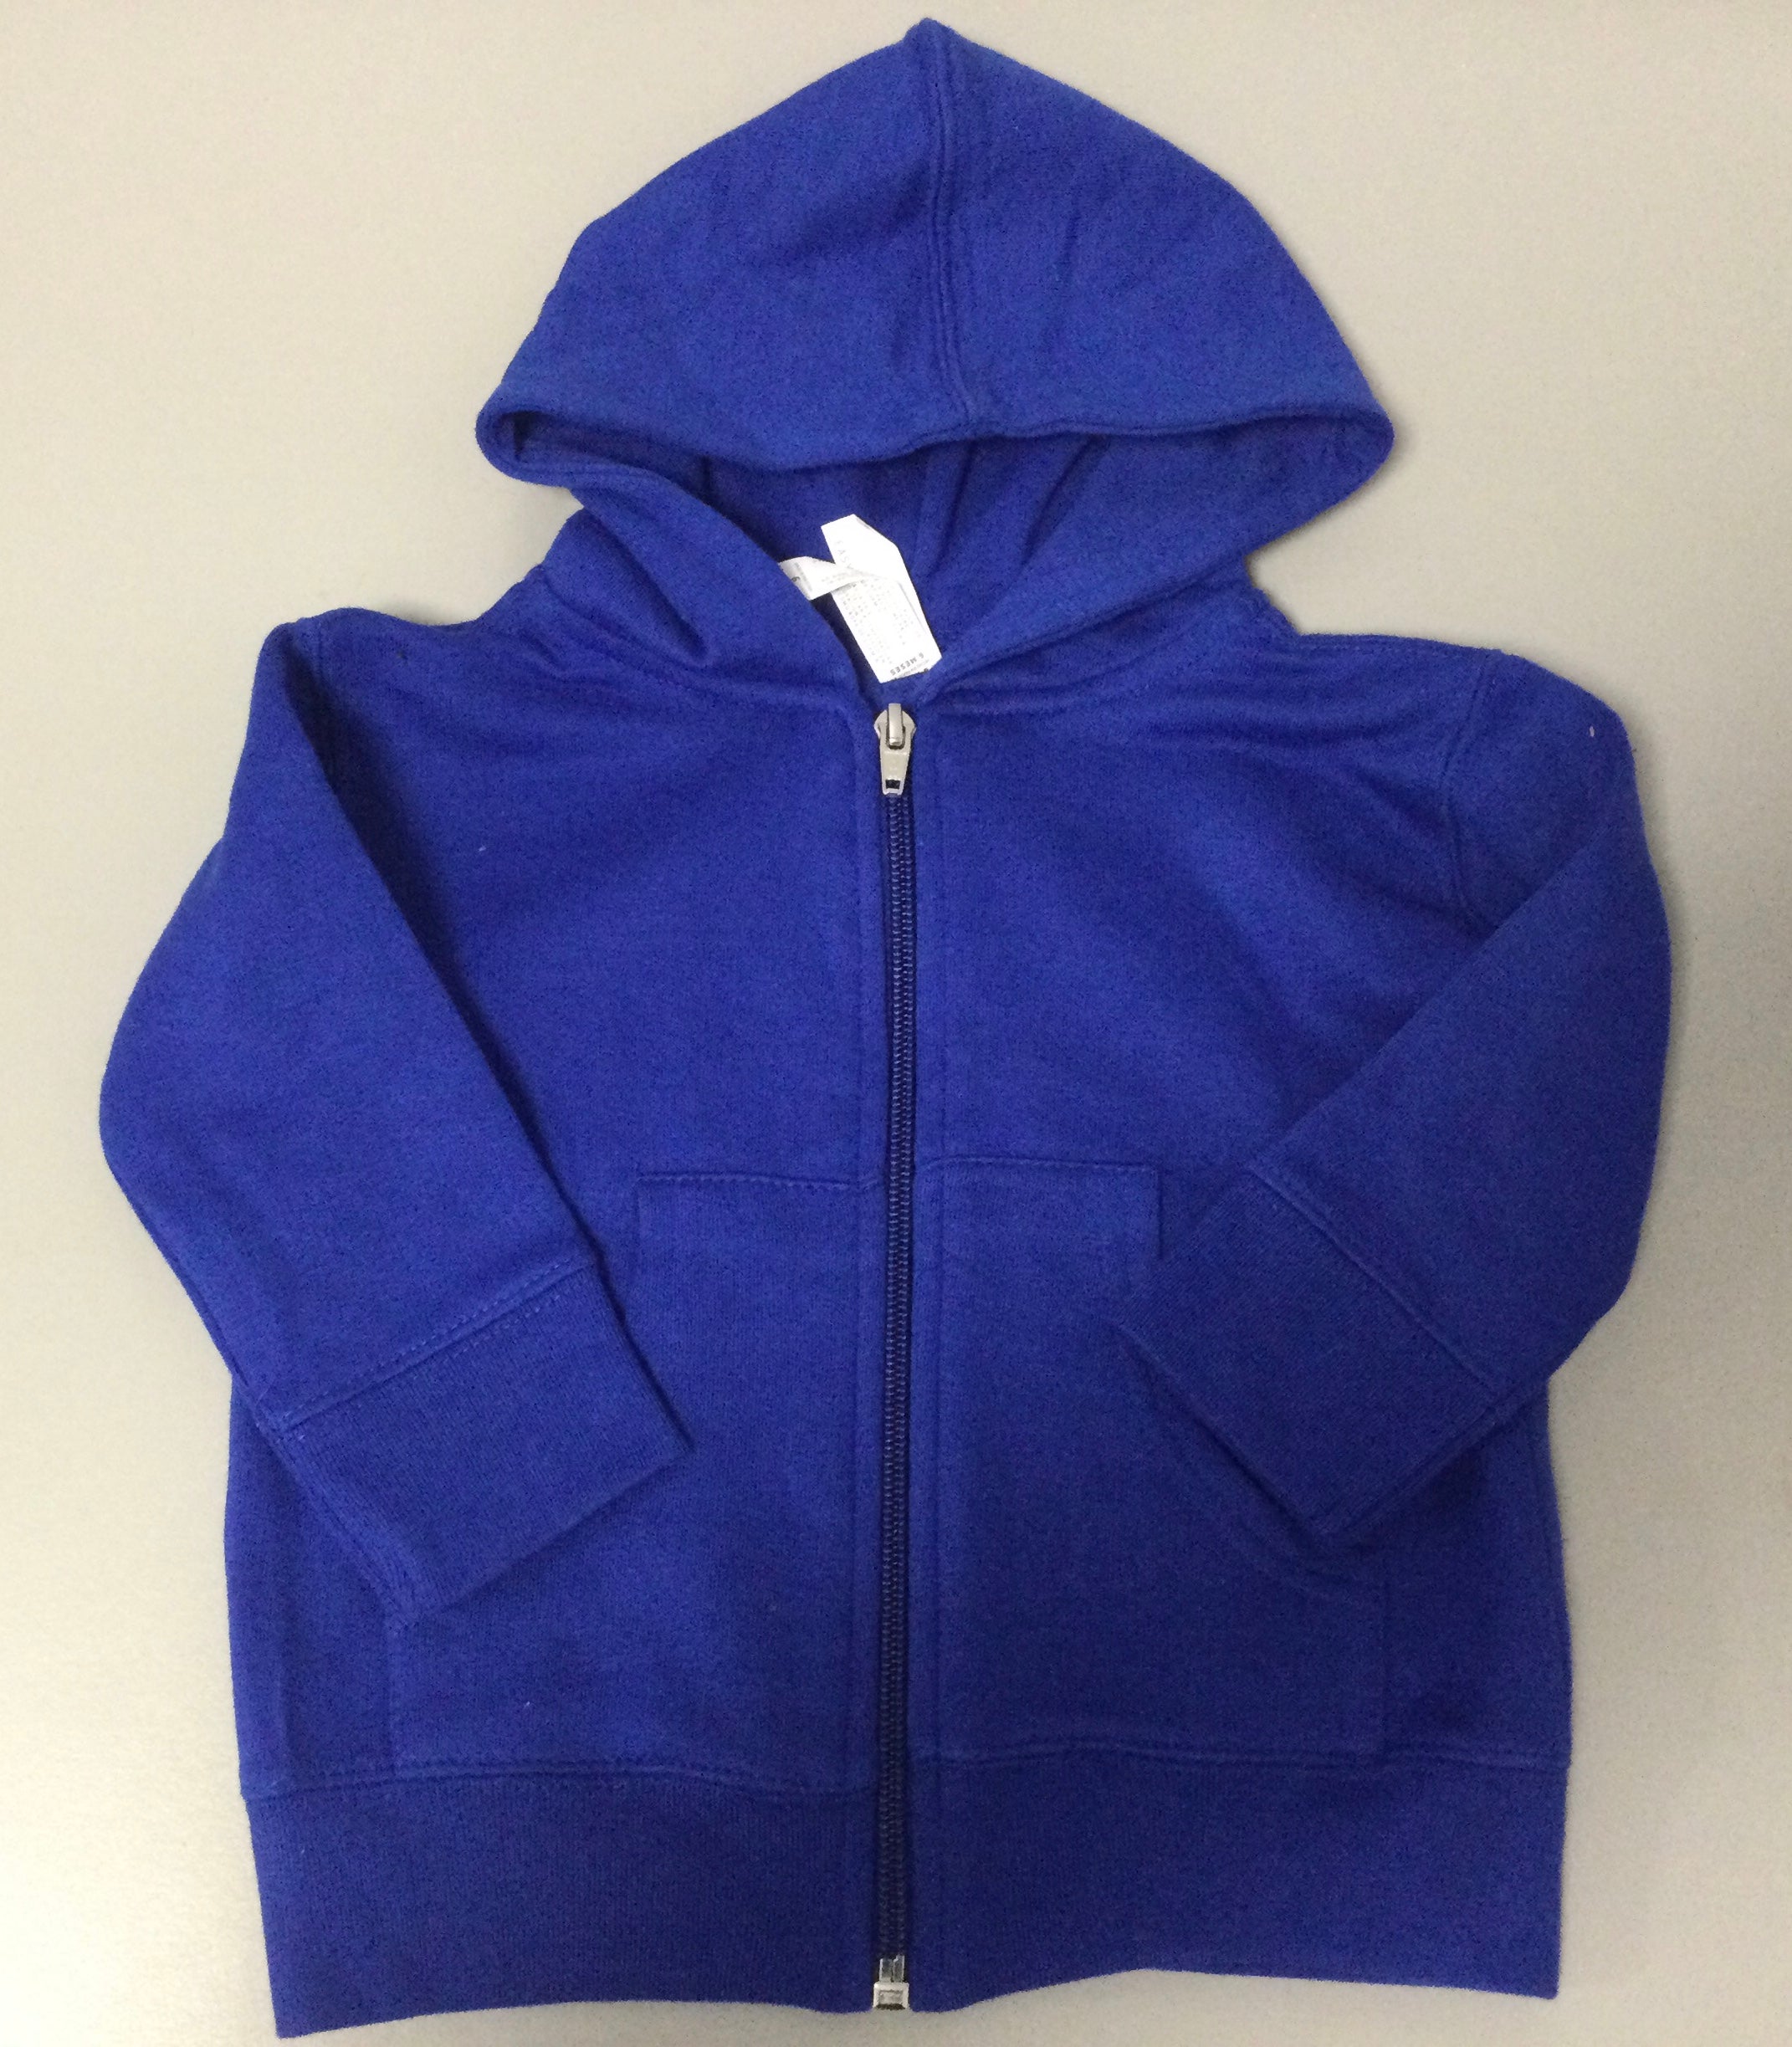 Baby Hooded Sweatshirt Zip Up Blue with Bling Logo